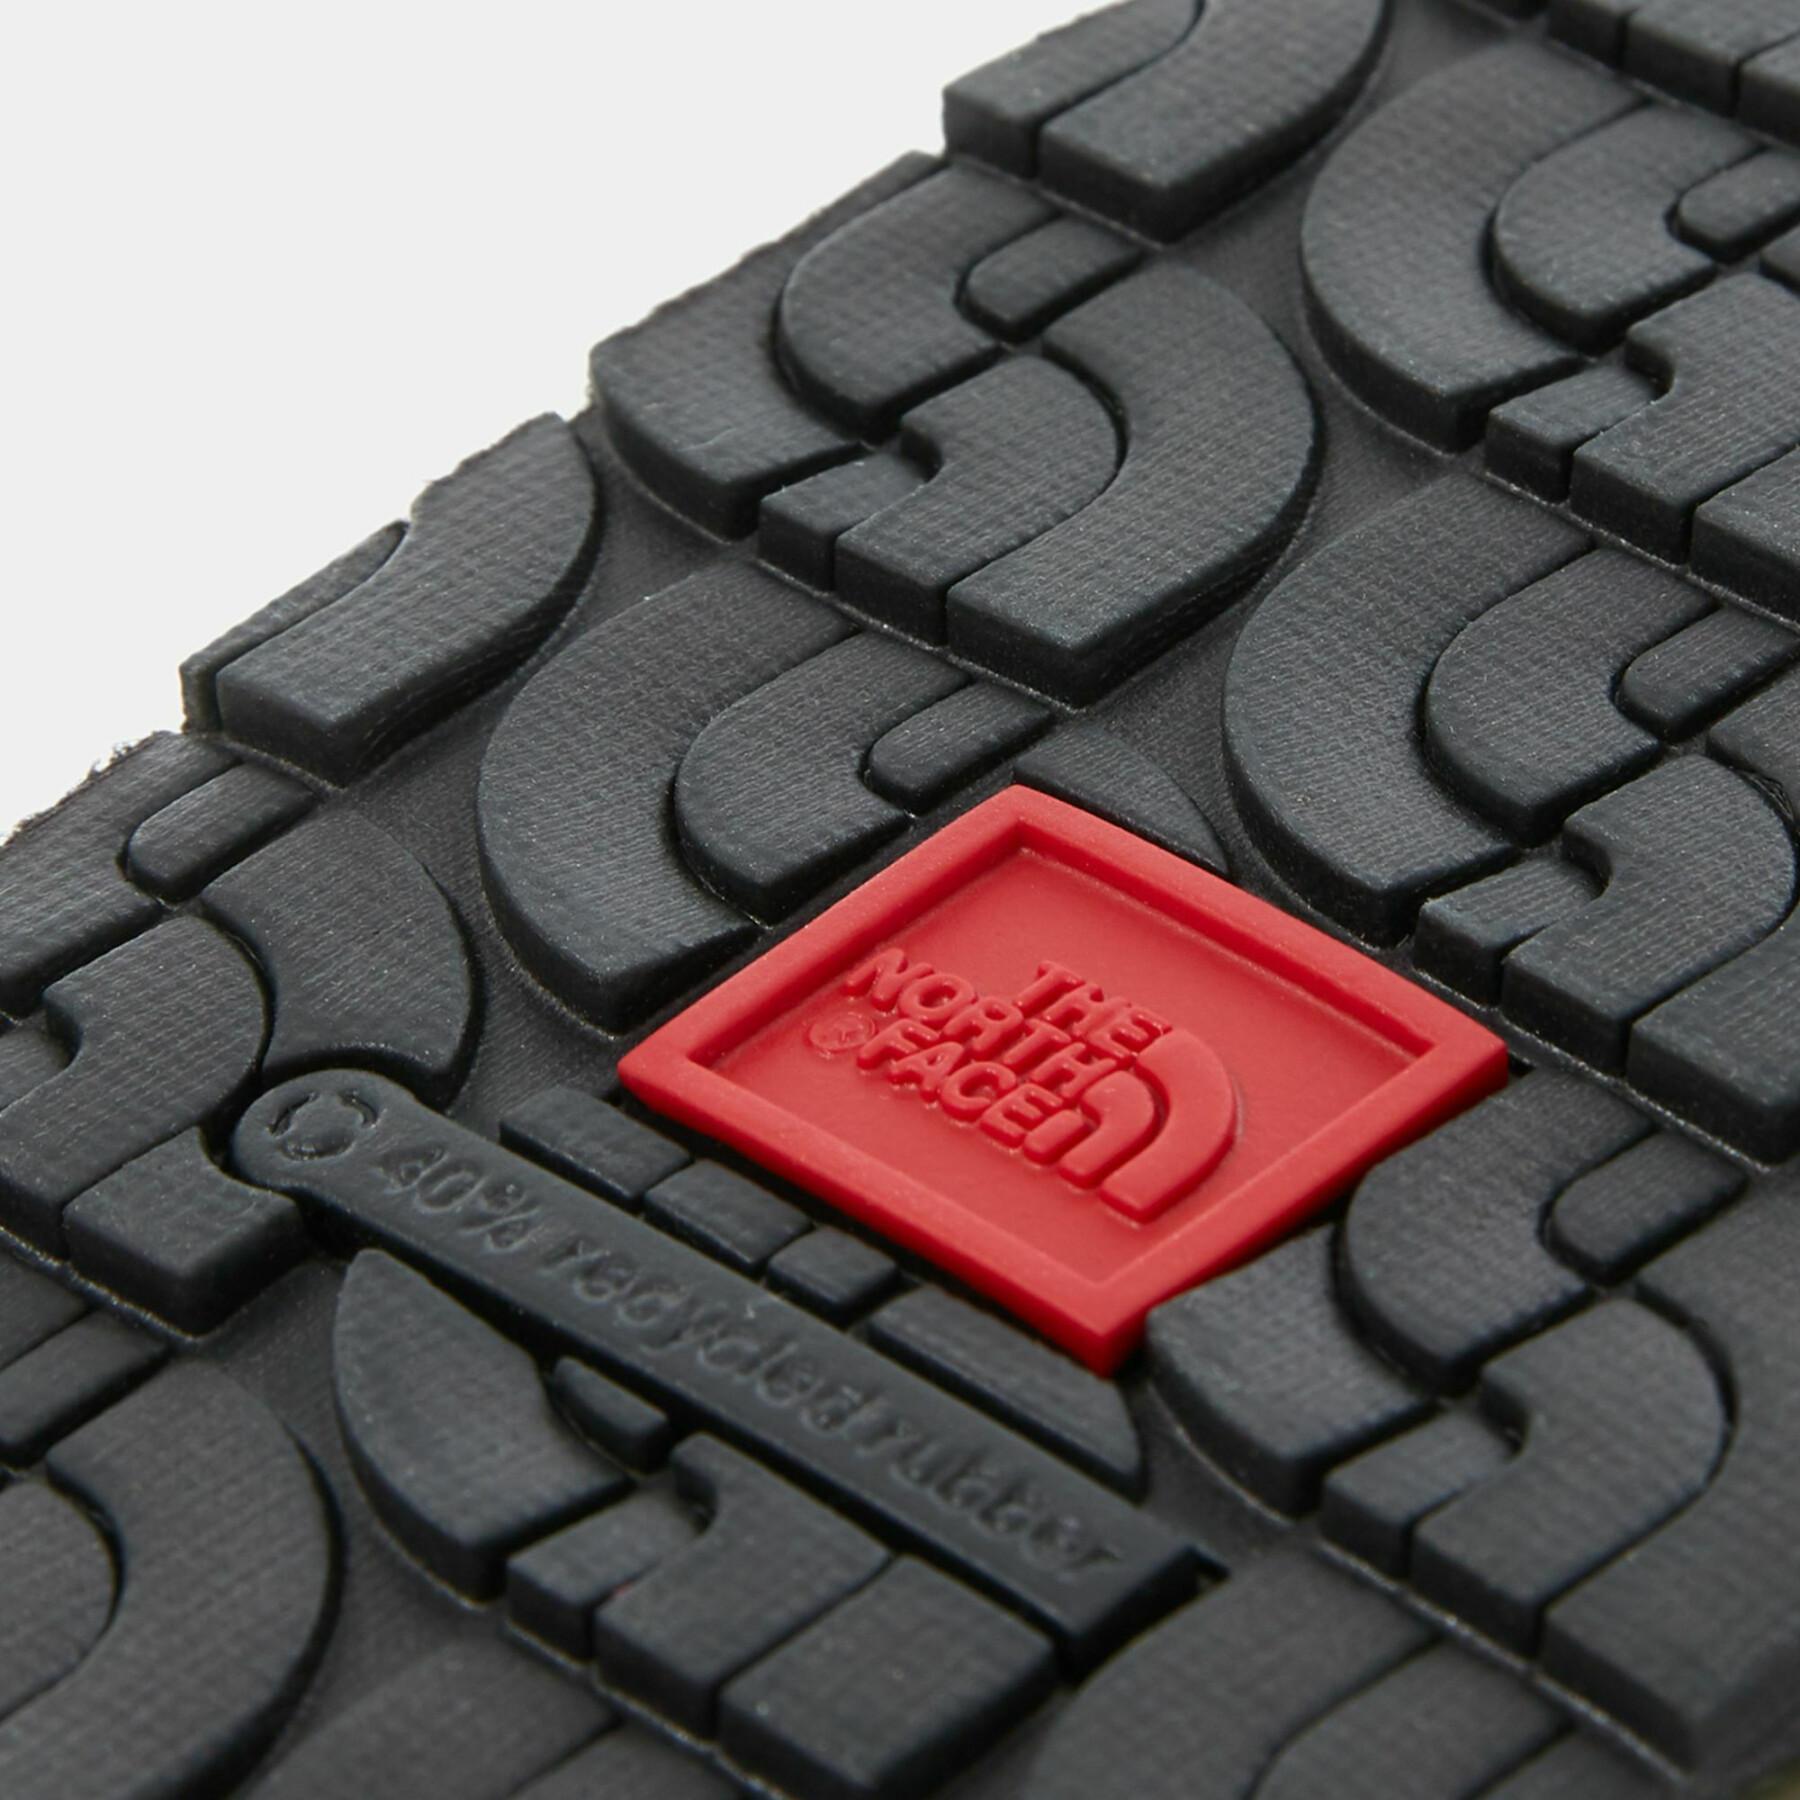 Zapatillas The North Face Thermoball V Traction